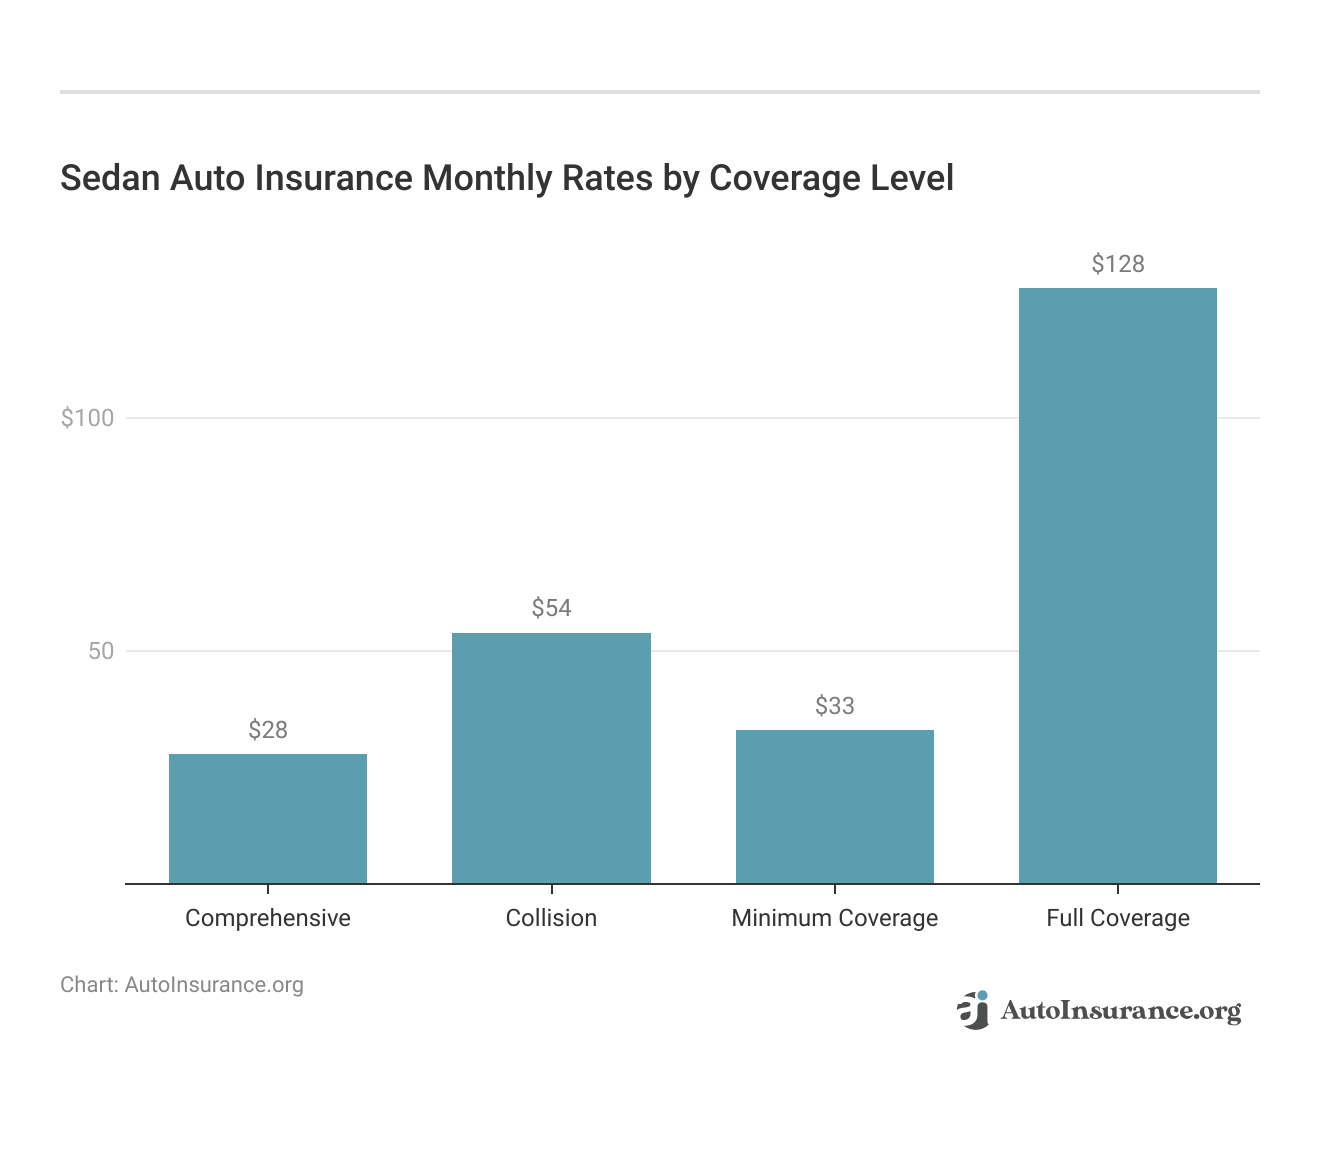 <h3>Sedan Auto Insurance Monthly Rates by Coverage Level</h3>